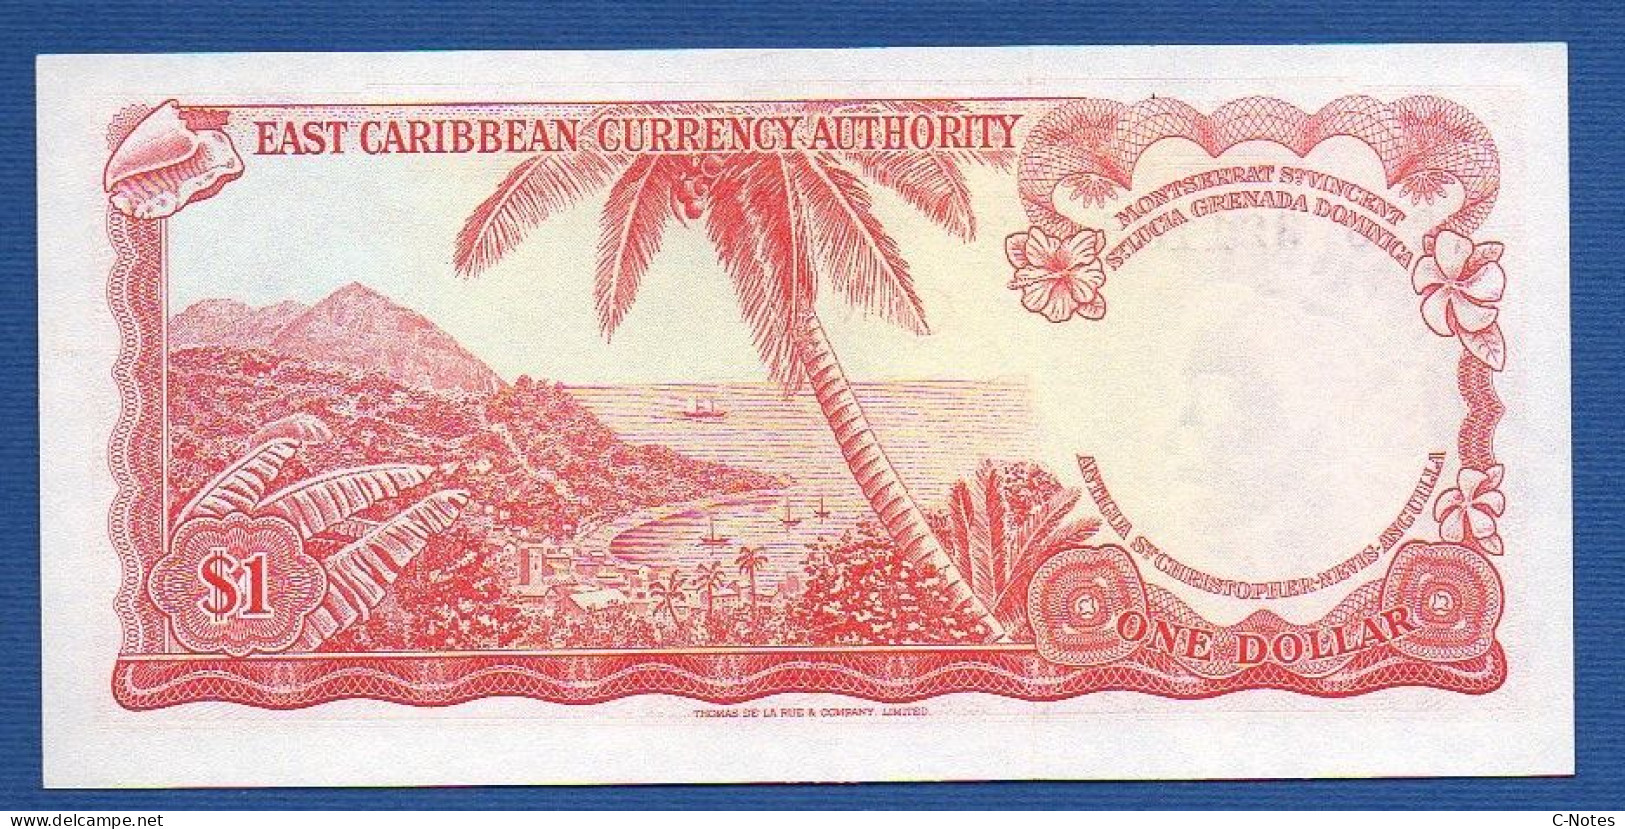 EAST CARIBBEAN STATES - St. Lucia - P.13l – 1 Dollar ND (1965) UNC, S/n C10 321183 - Caribes Orientales